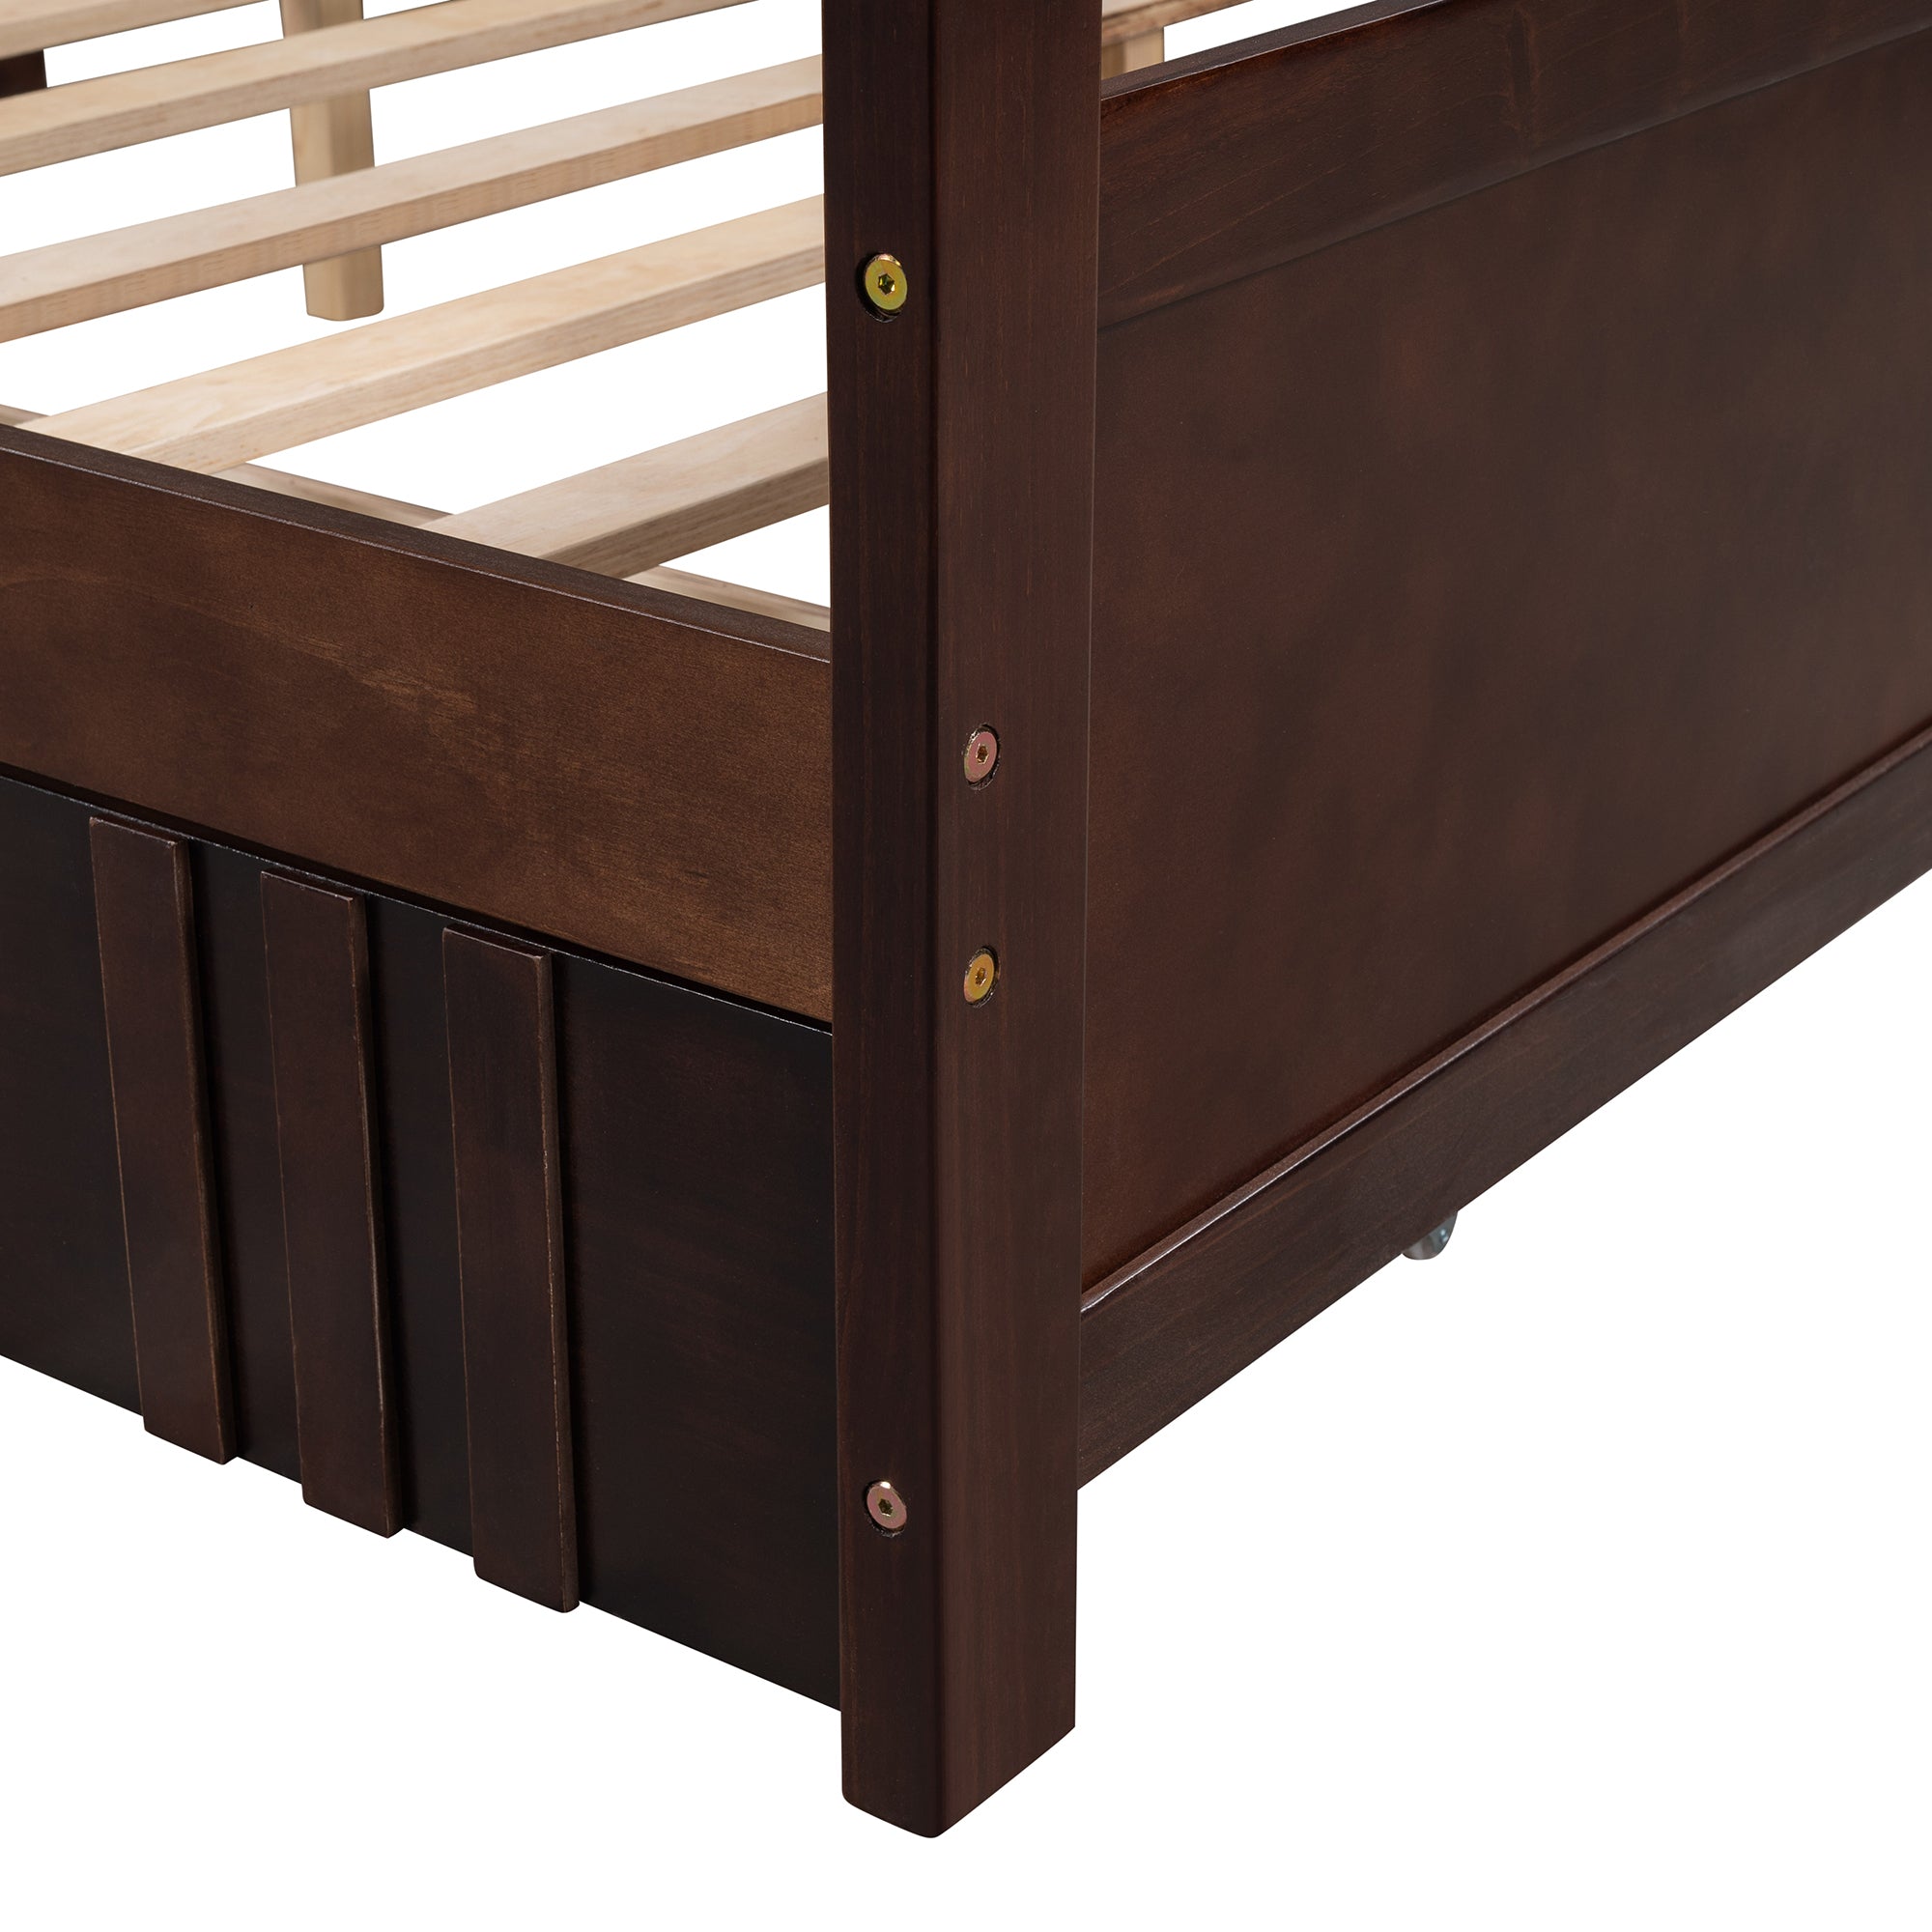 Full Size Daybed Wood Bed with Two Drawers (Espresso)